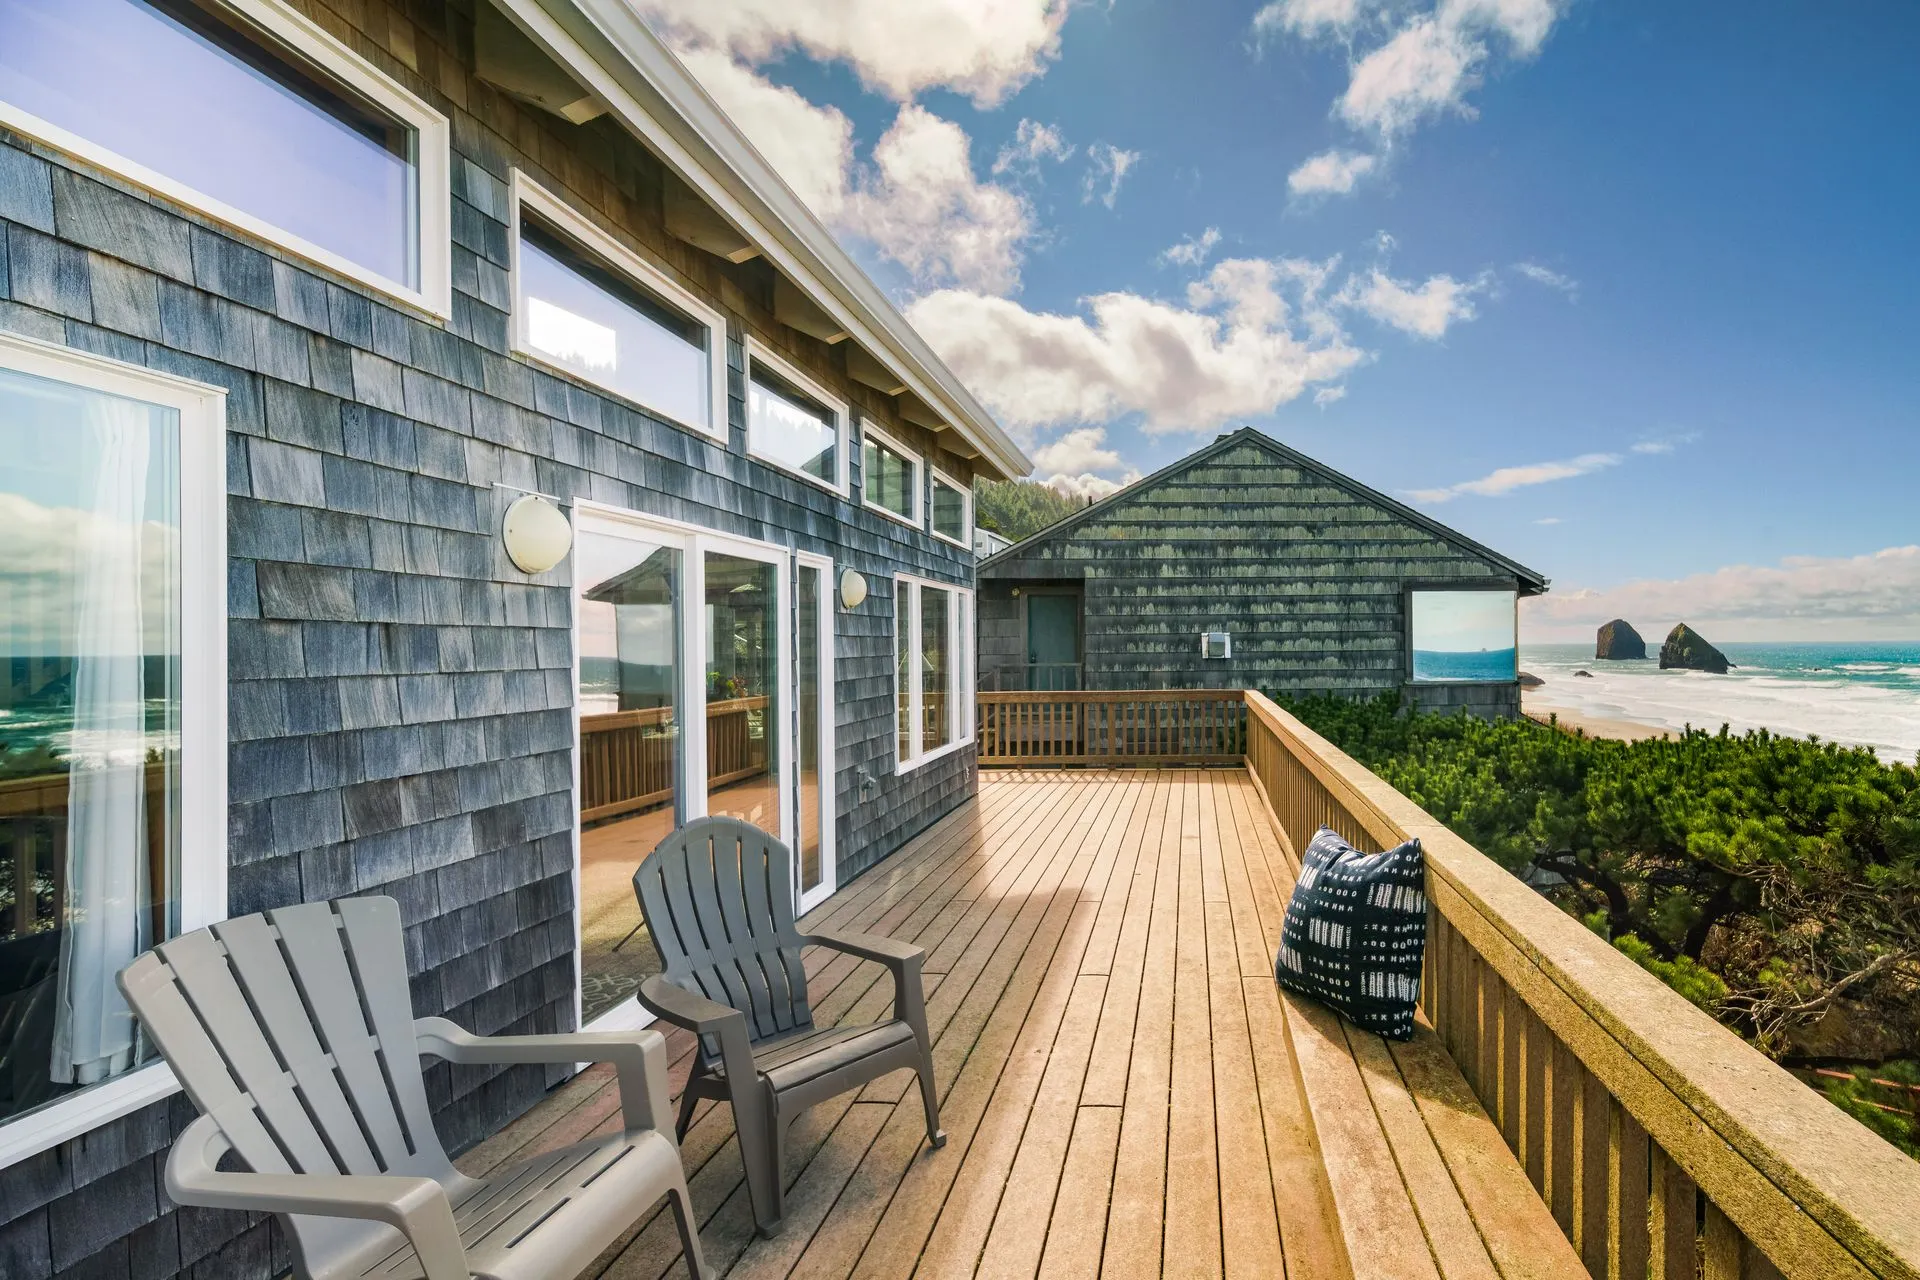 Vacation Rental in Cannon Beach, Pacific House deck with view of the ocean